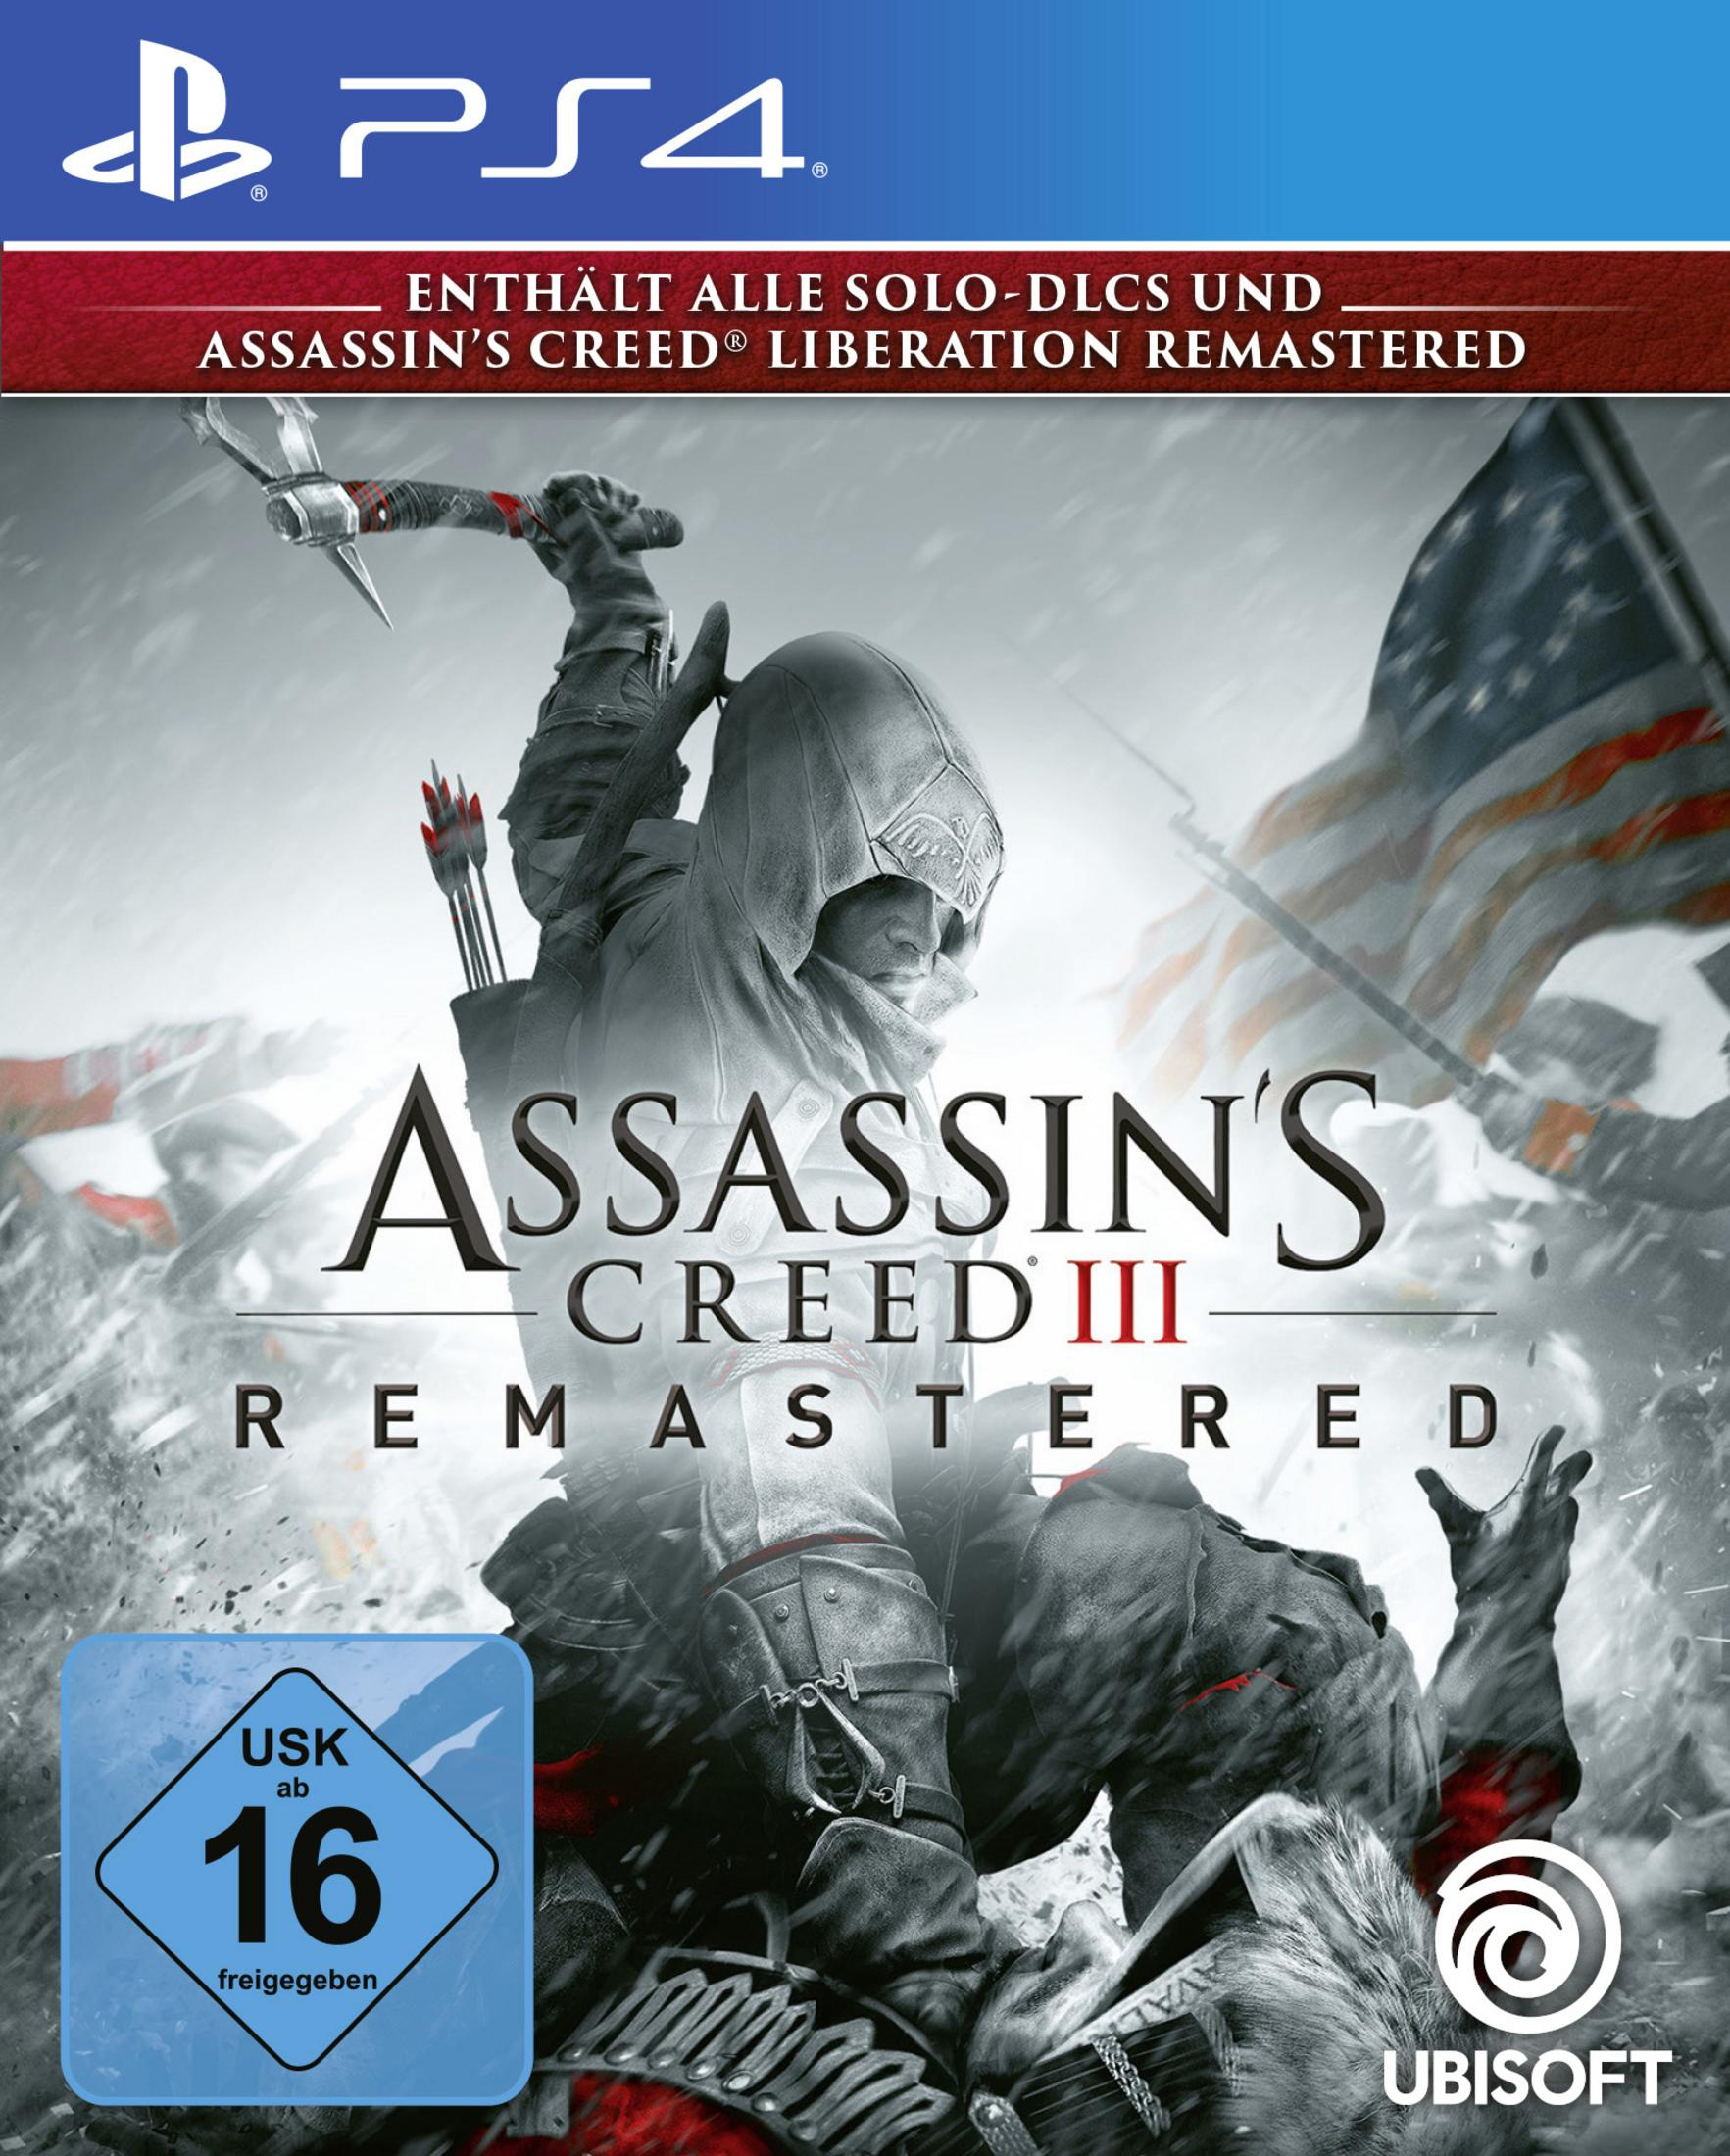 Assassin´s Creed 3 - PS4 Remastered [PlayStation 4